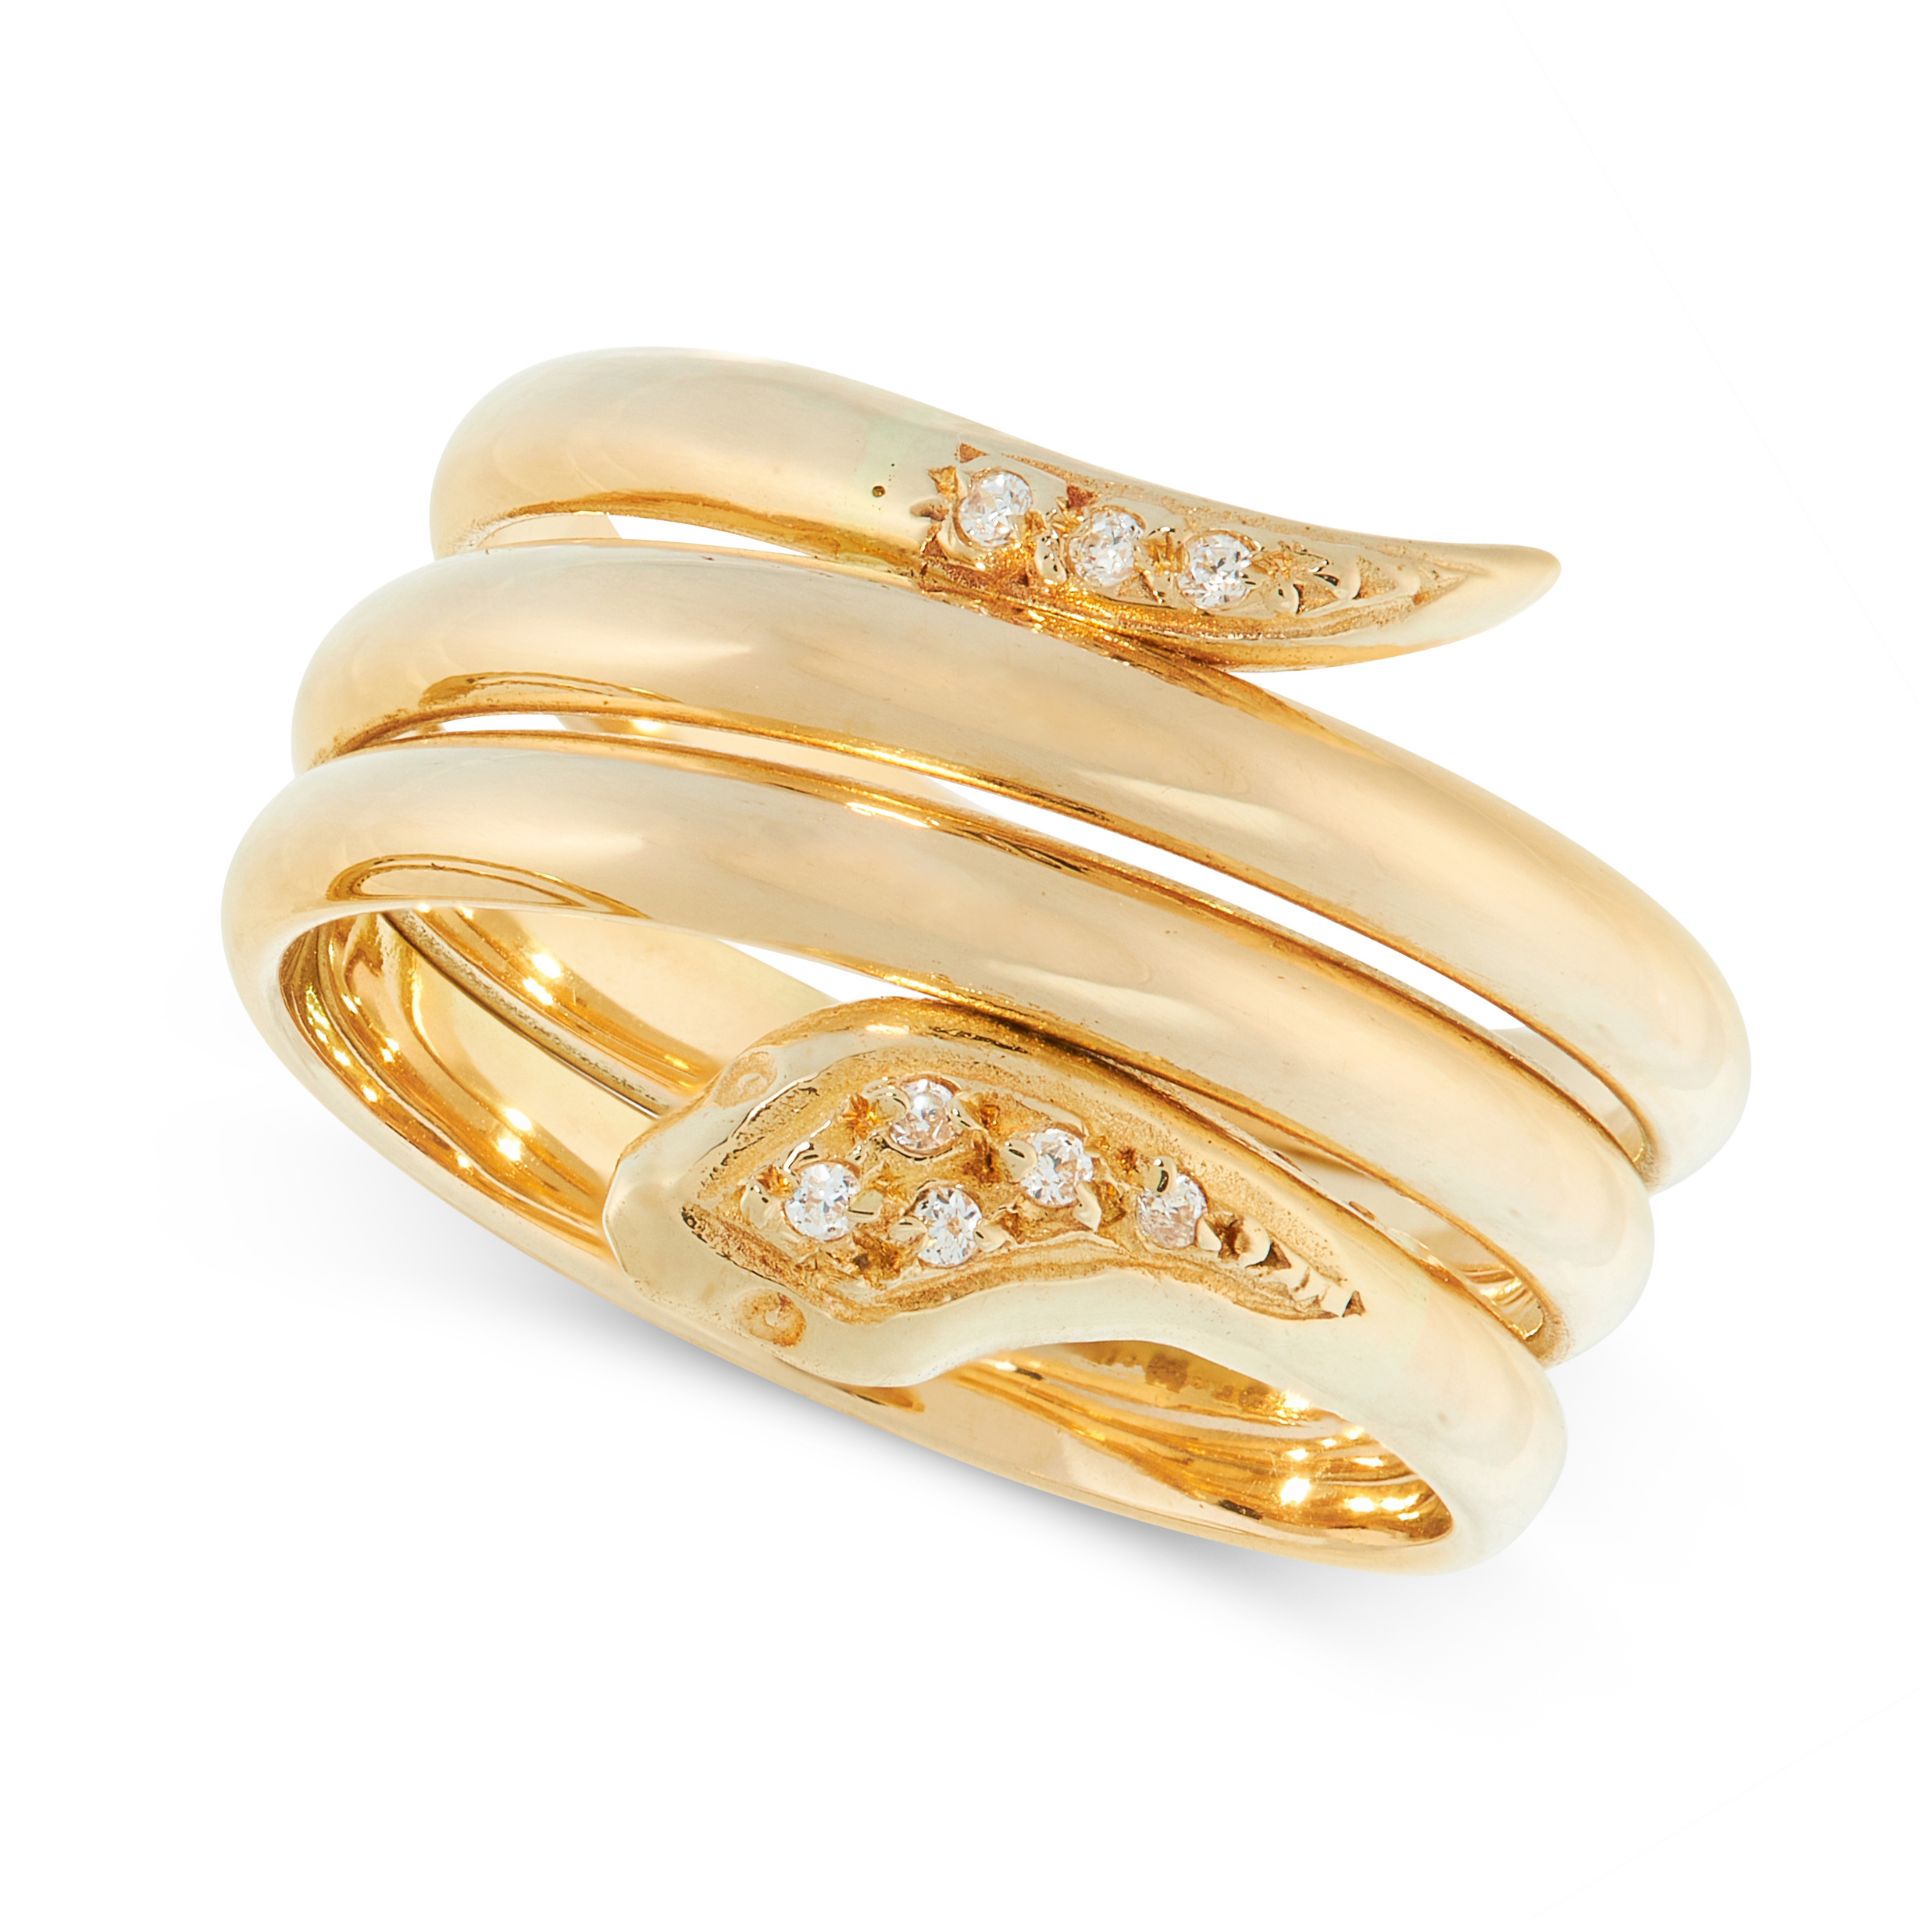 A DIAMOND SNAKE RING in yellow gold, in the form of a snake coiled around itself, set with round cut